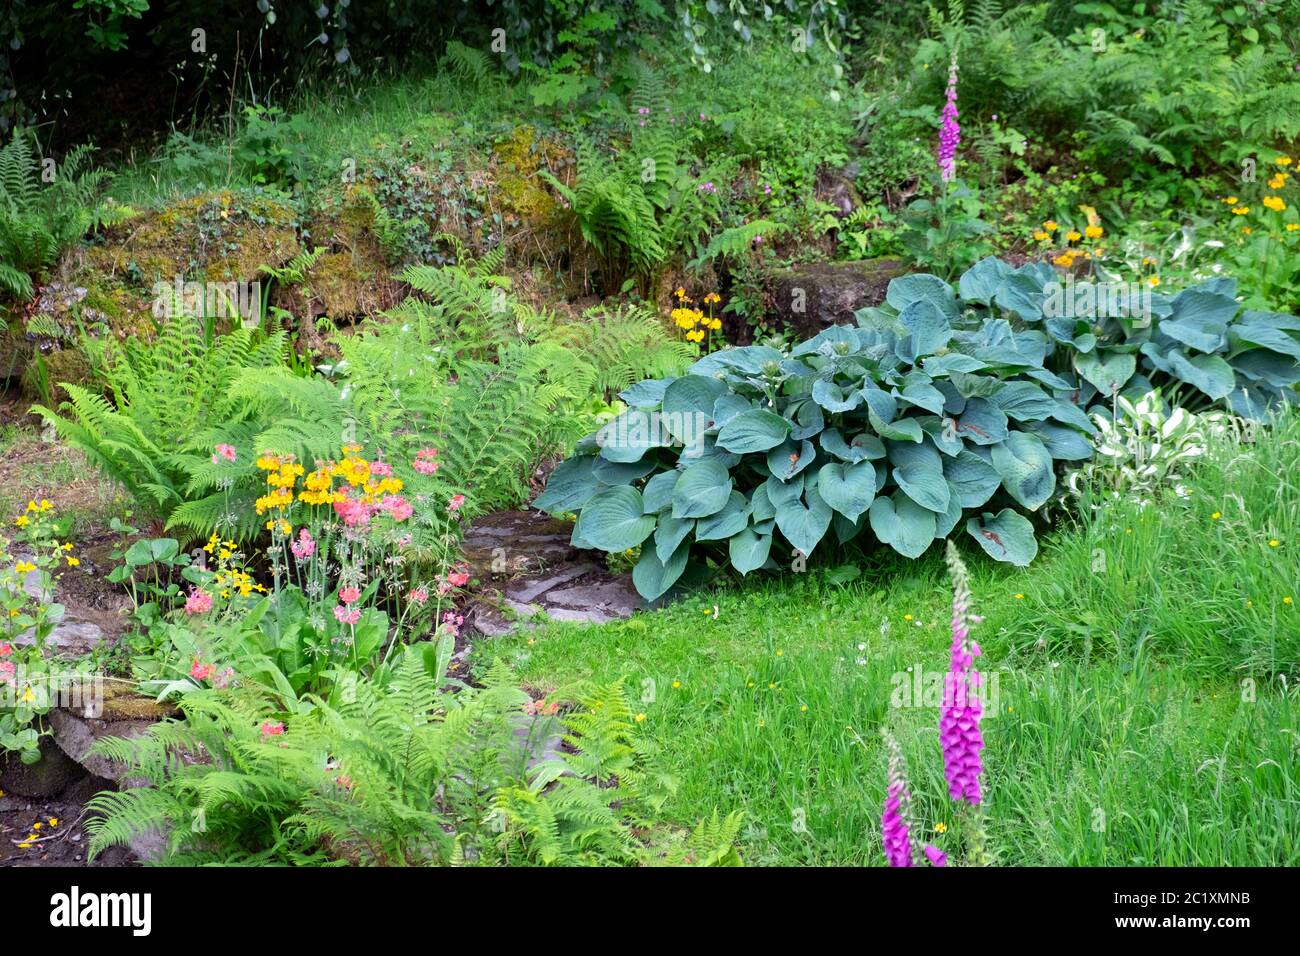 View of Hosta, candelabra primrose, foxgloves, ferns, plants growing in a shaded damp area of a country garden Carmarthenshire Wales UK. KATHY DEWITT Stock Photo